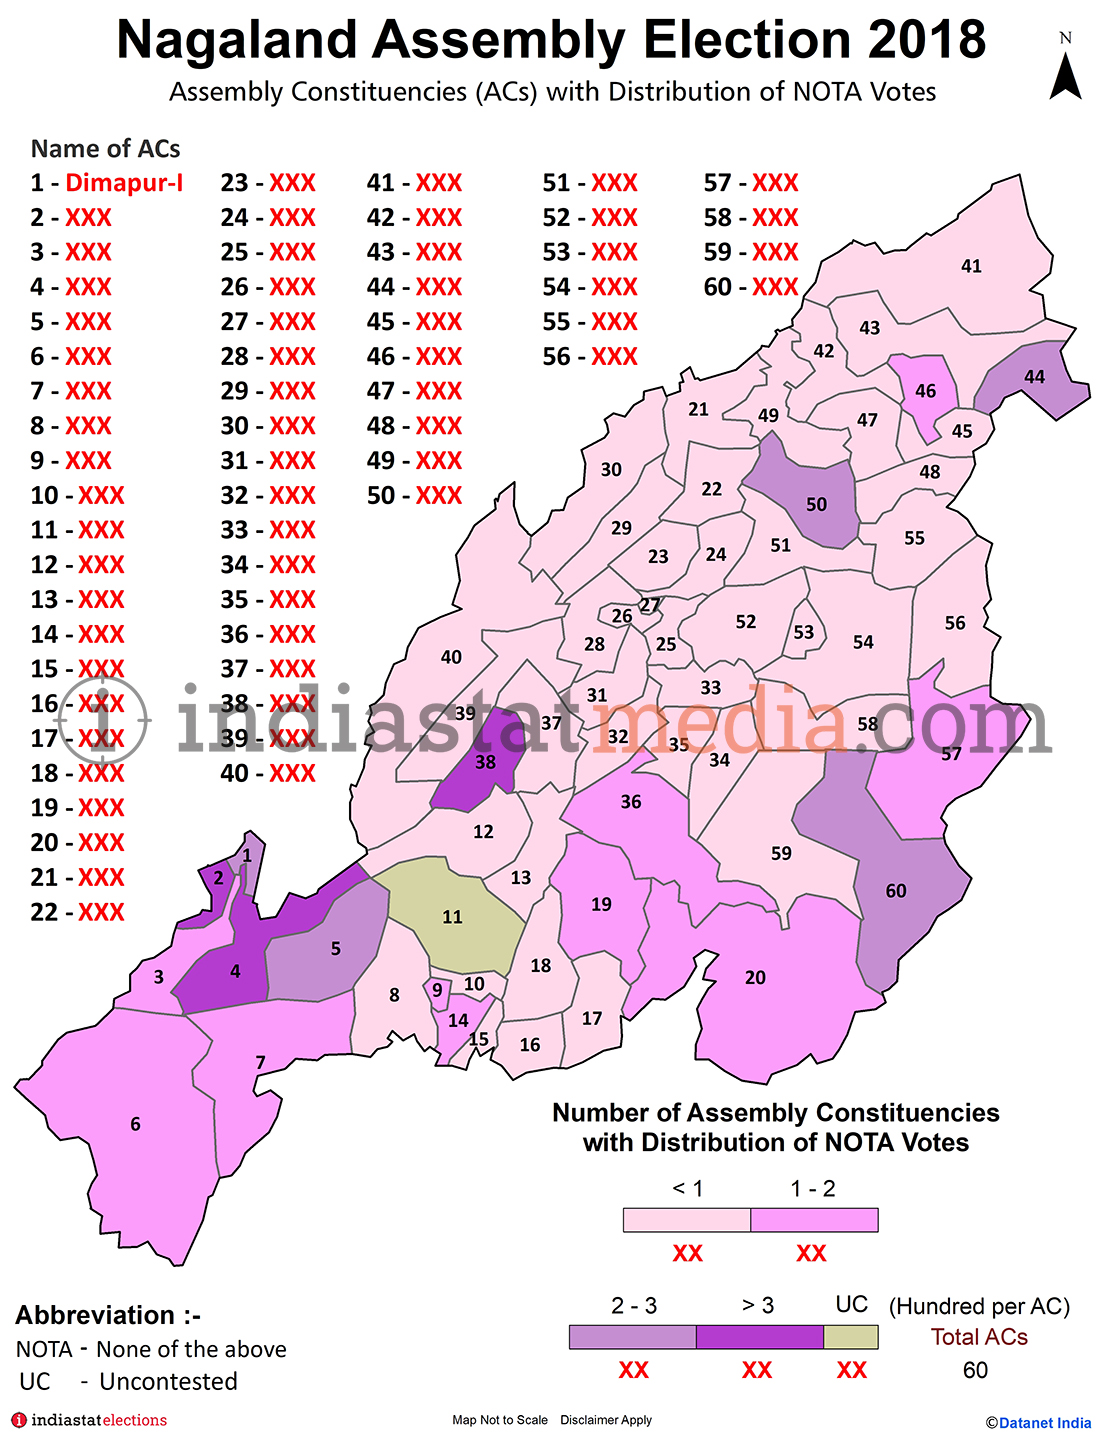 Distribution of NOTA Votes by Constituencies in Nagaland (Assembly Election - 2018)